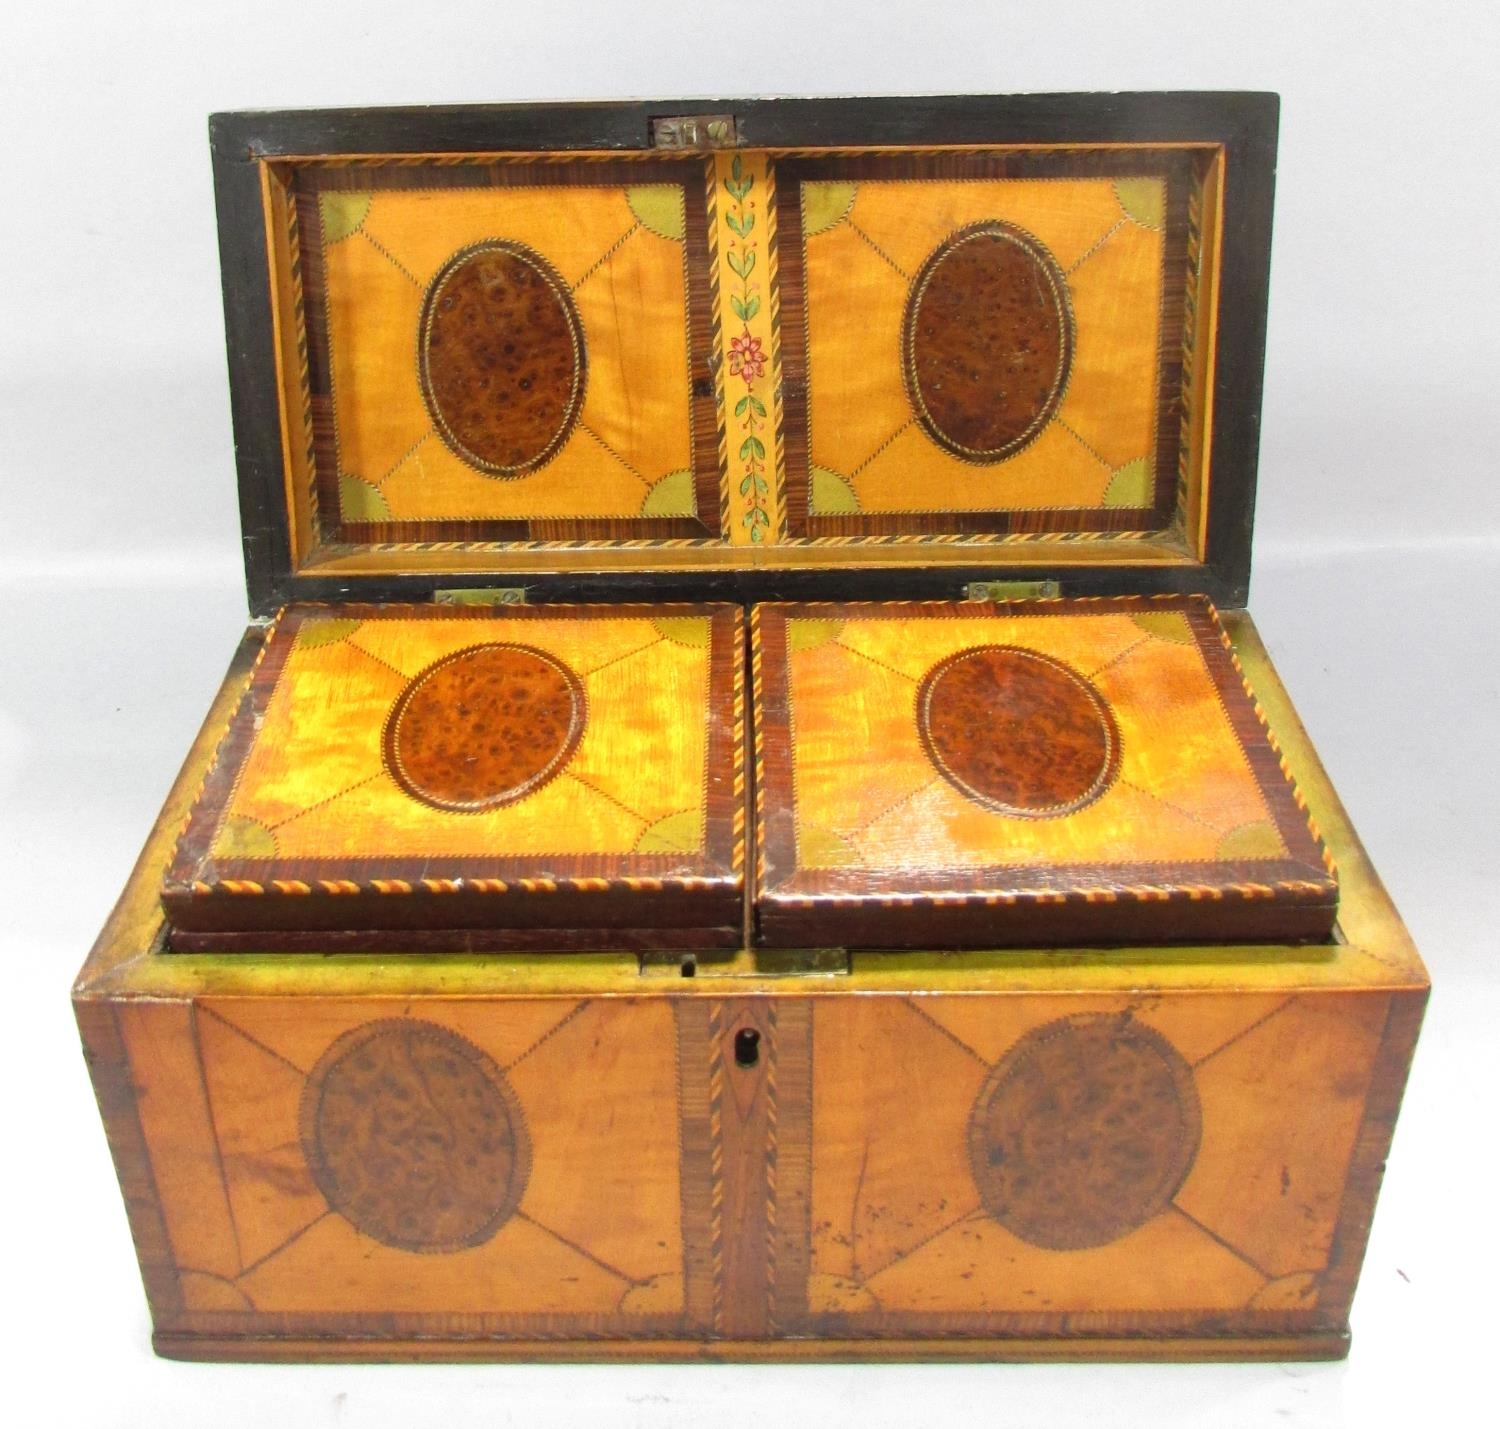 An 18th century satinwood and burr walnut veneered tea caddy, the lid opening to reveal two matching